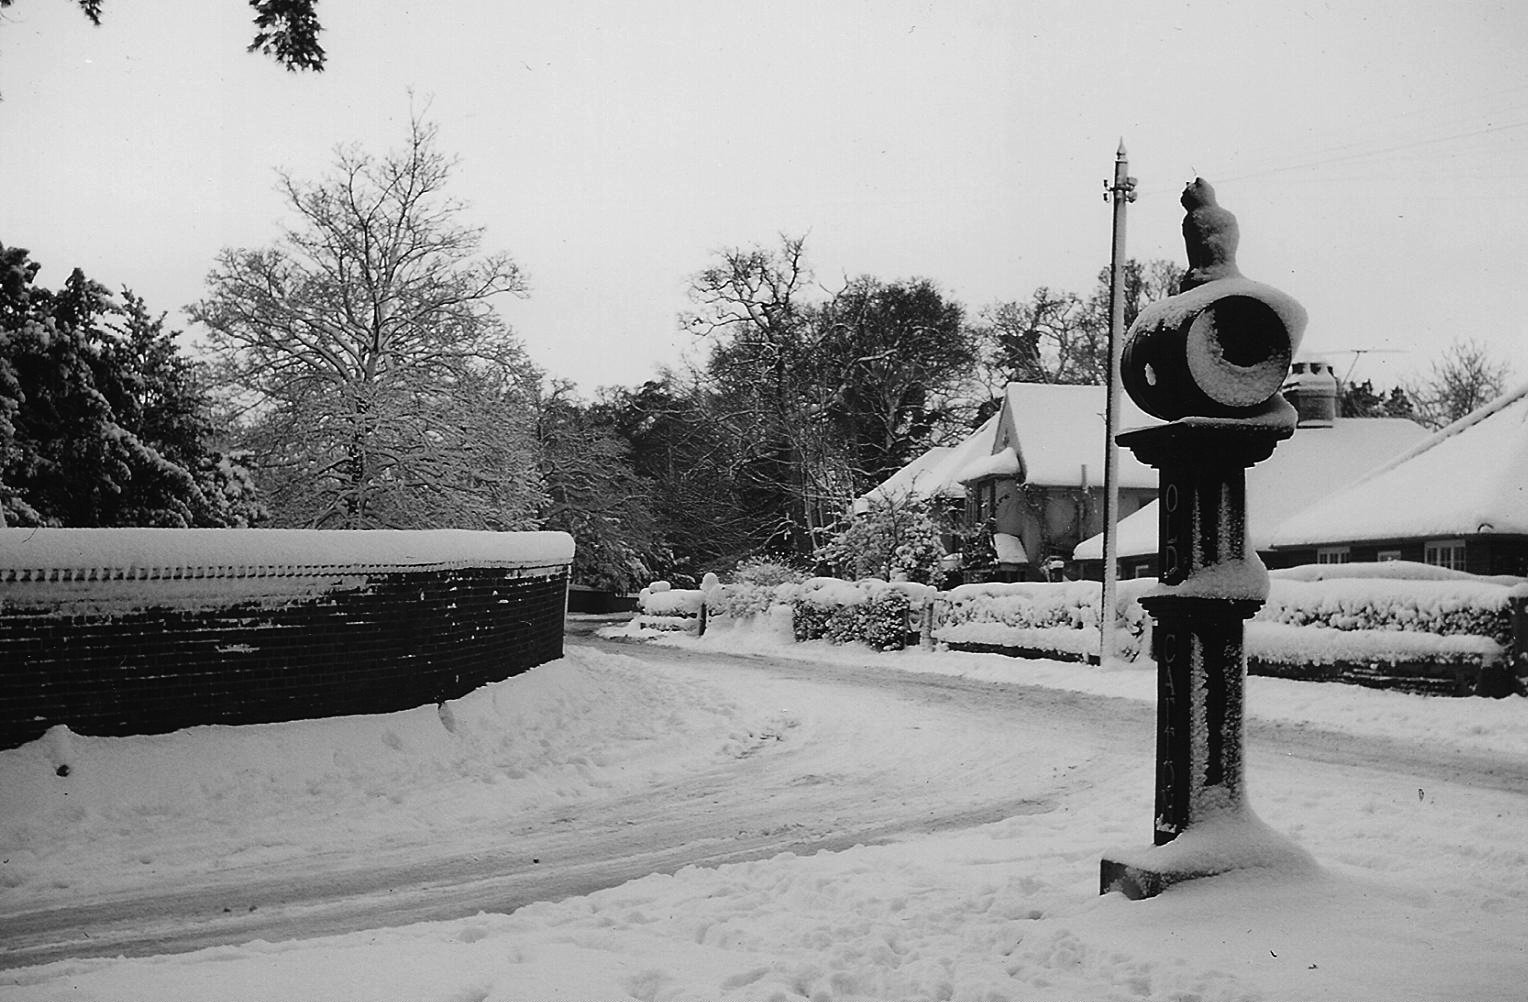 Snow at the junction - 1960s